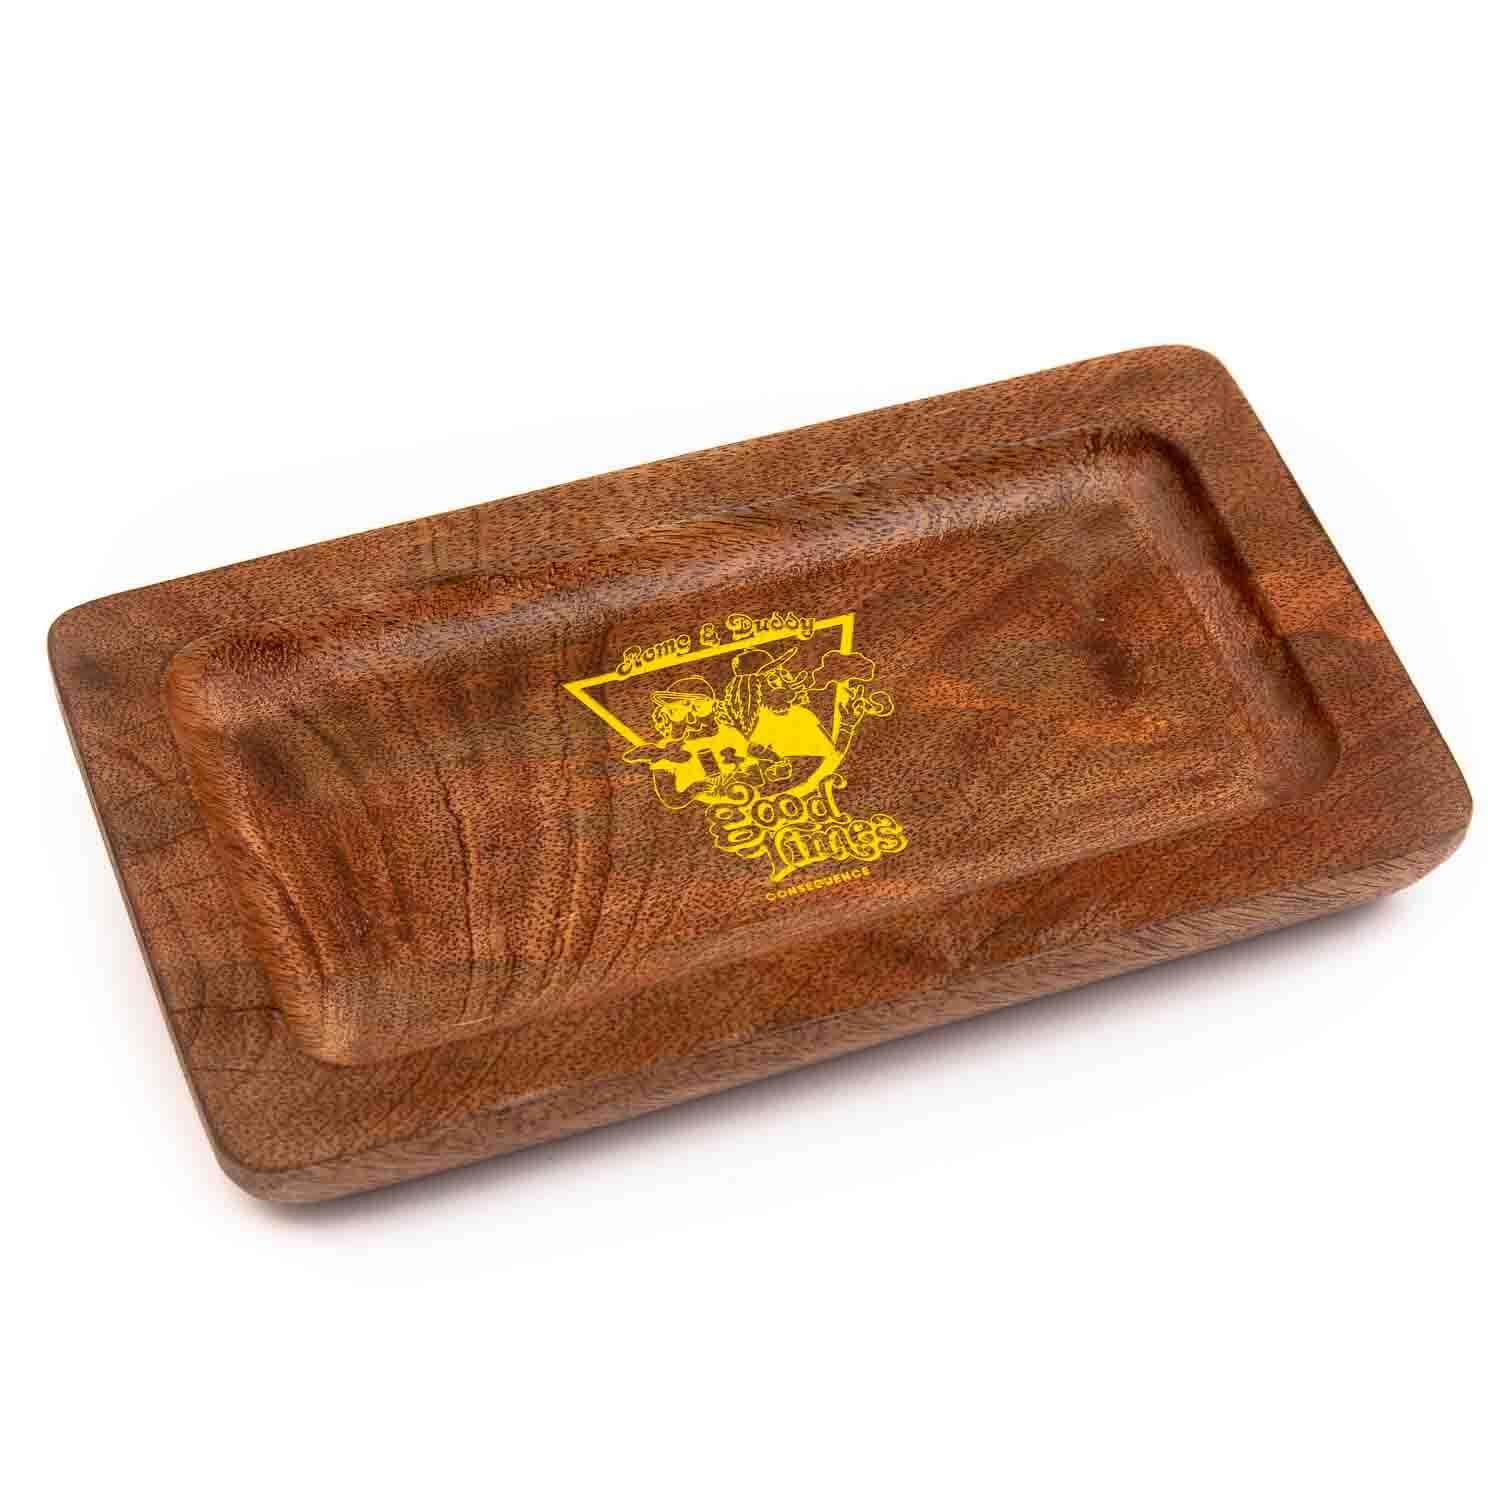 https://smokepromos.com/wp-content/uploads/2022/09/Wood_Rolling_Tray_Painted_Yellow.jpg